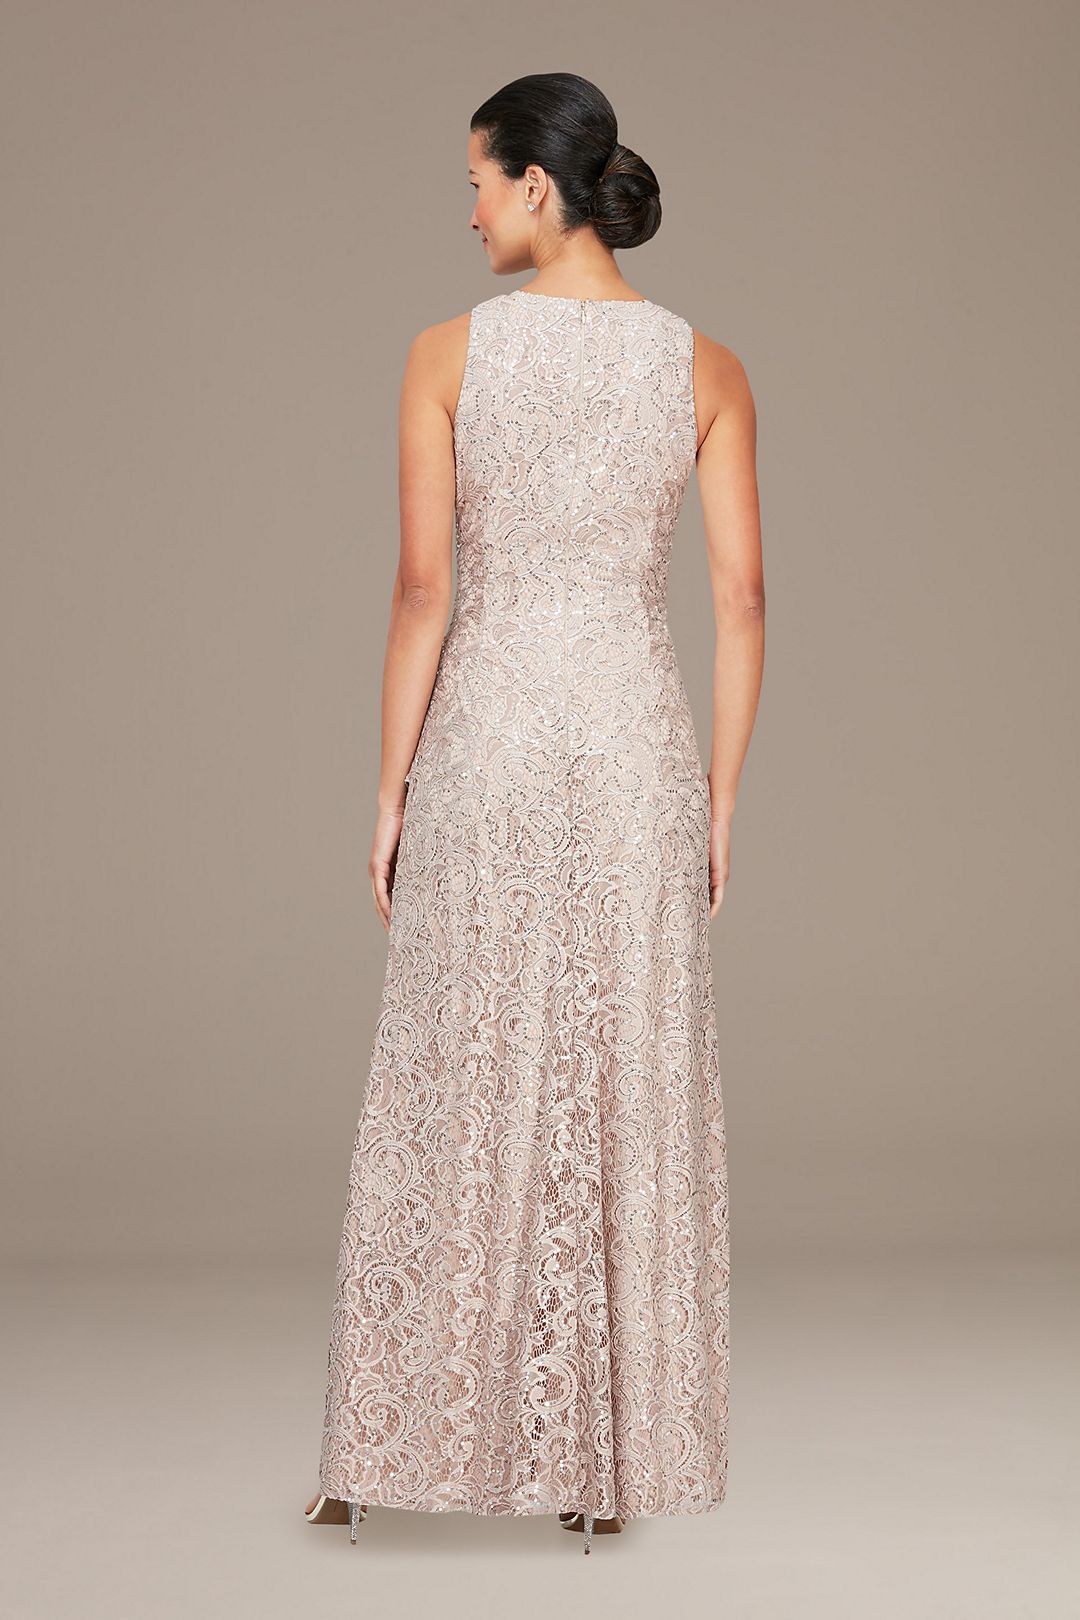 Glitter Lace Sheath Gown with Skirt Slit Image 2